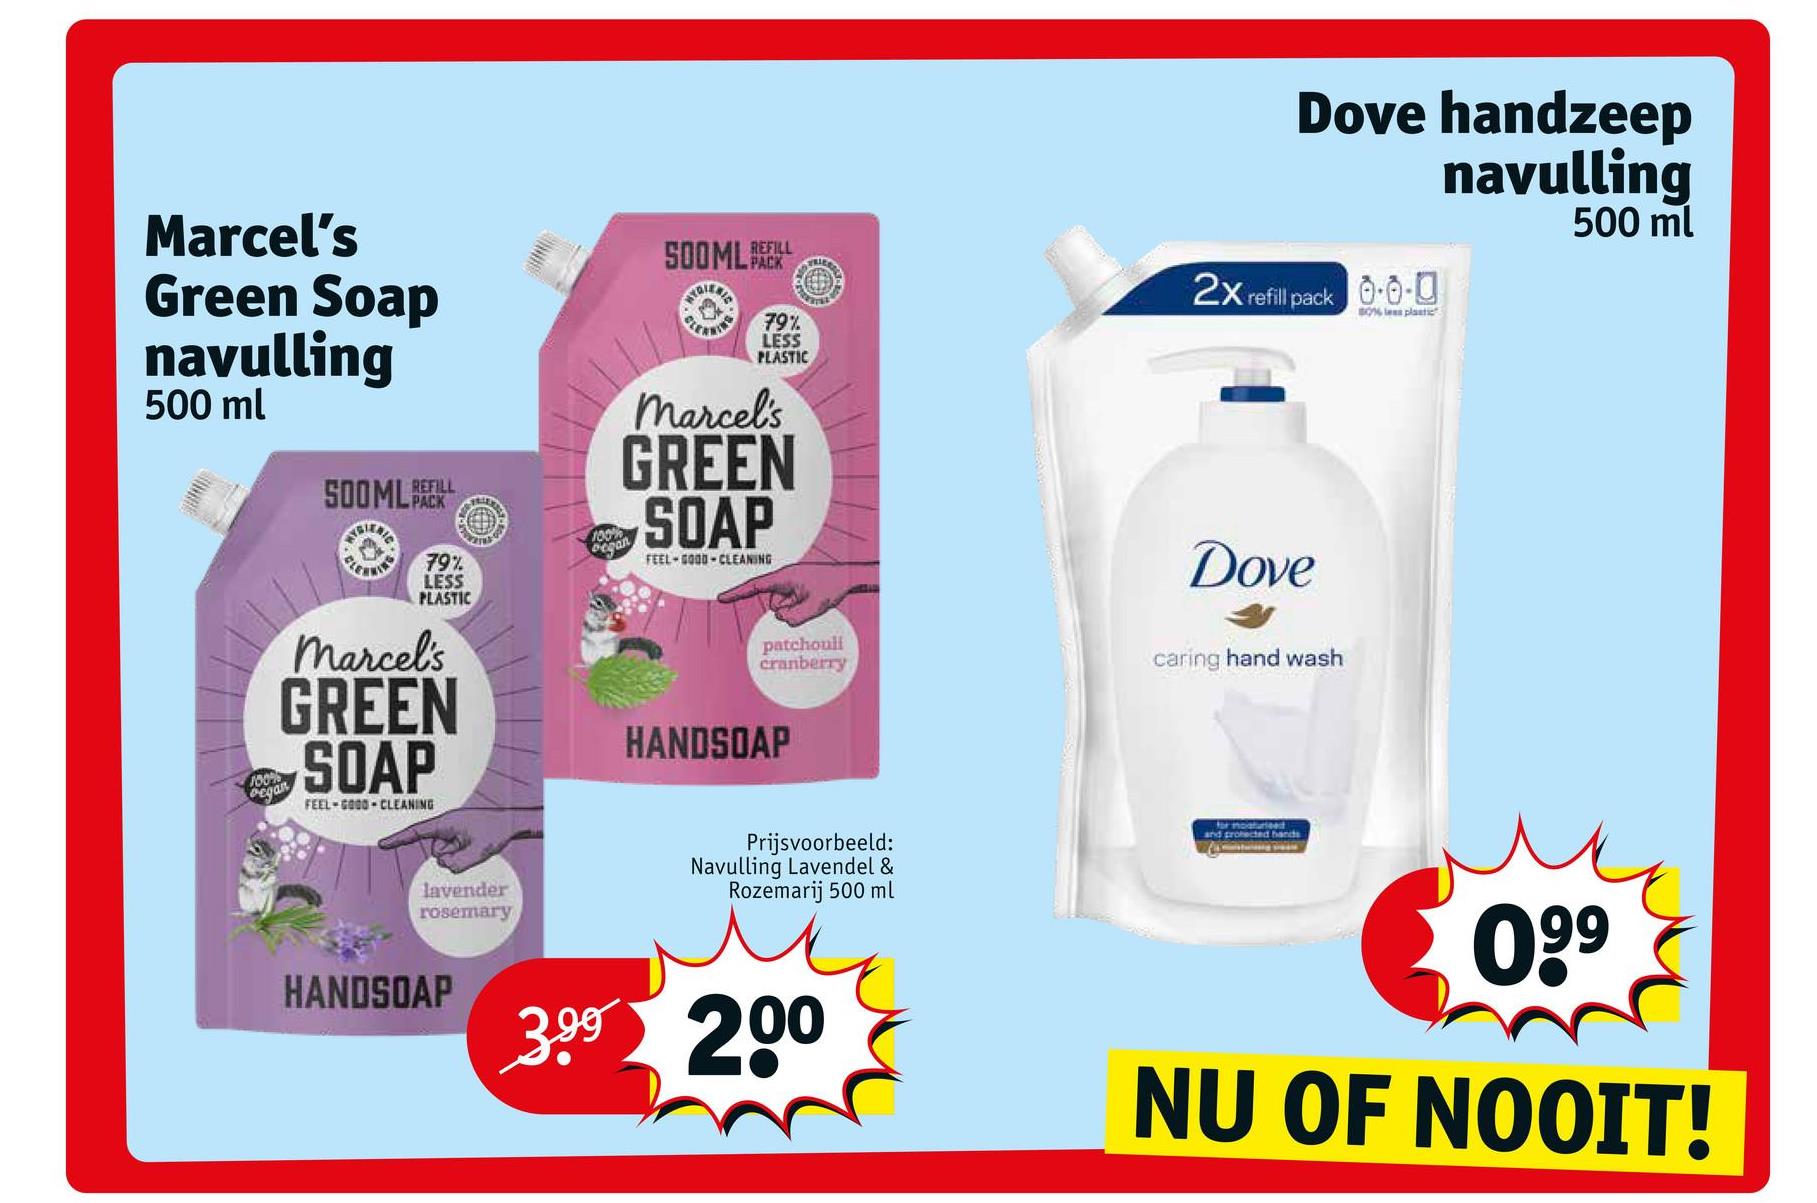 Marcel's
Green Soap
navulling
500 ml
REFILL
TRIENTS
ELE
(EI)
79%
LESS
PLASTIC
REFILL
TDIENTS
PO
Marcel's
GREEN
SOAP
FEEL GOOD-CLEANING
HANDSOAP
100%
began
FRIER
79%
LESS
PLASTIC
Marcel's
GREEN
SOAP
100%
Pegan
FEEL-GOOD-CLEANING
lavender
rosemary
HANDSOAP 3.⁹⁹ 200
TE
patchouli
cranberry
Prijsvoorbeeld:
Navulling Lavendel &
Rozemarij 500 ml
Dove handzeep
navulling
500 ml
2x refill pack 0.0-0
80% les plastic
Dove
caring hand wash
for moaturieed
and protected bands
0.⁹9
NU OF NOOIT!